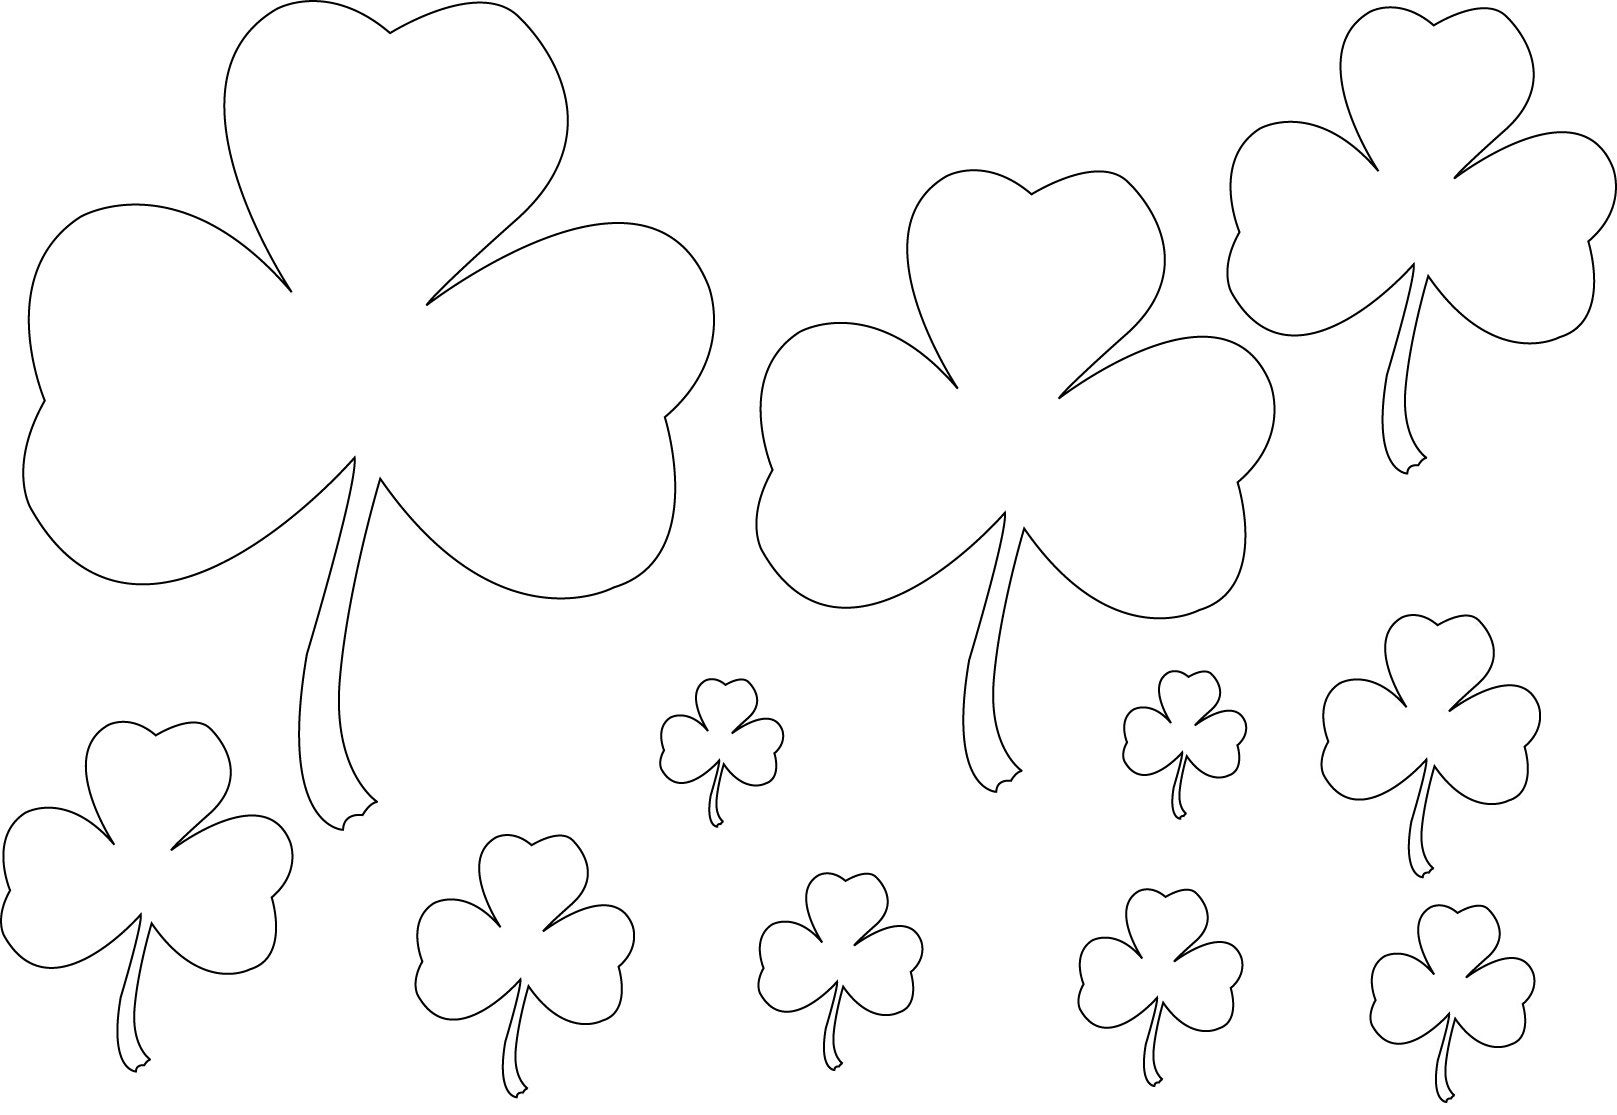 Shamrock coloring pages pictures free printable coloring pages free coloring pages coloring pages